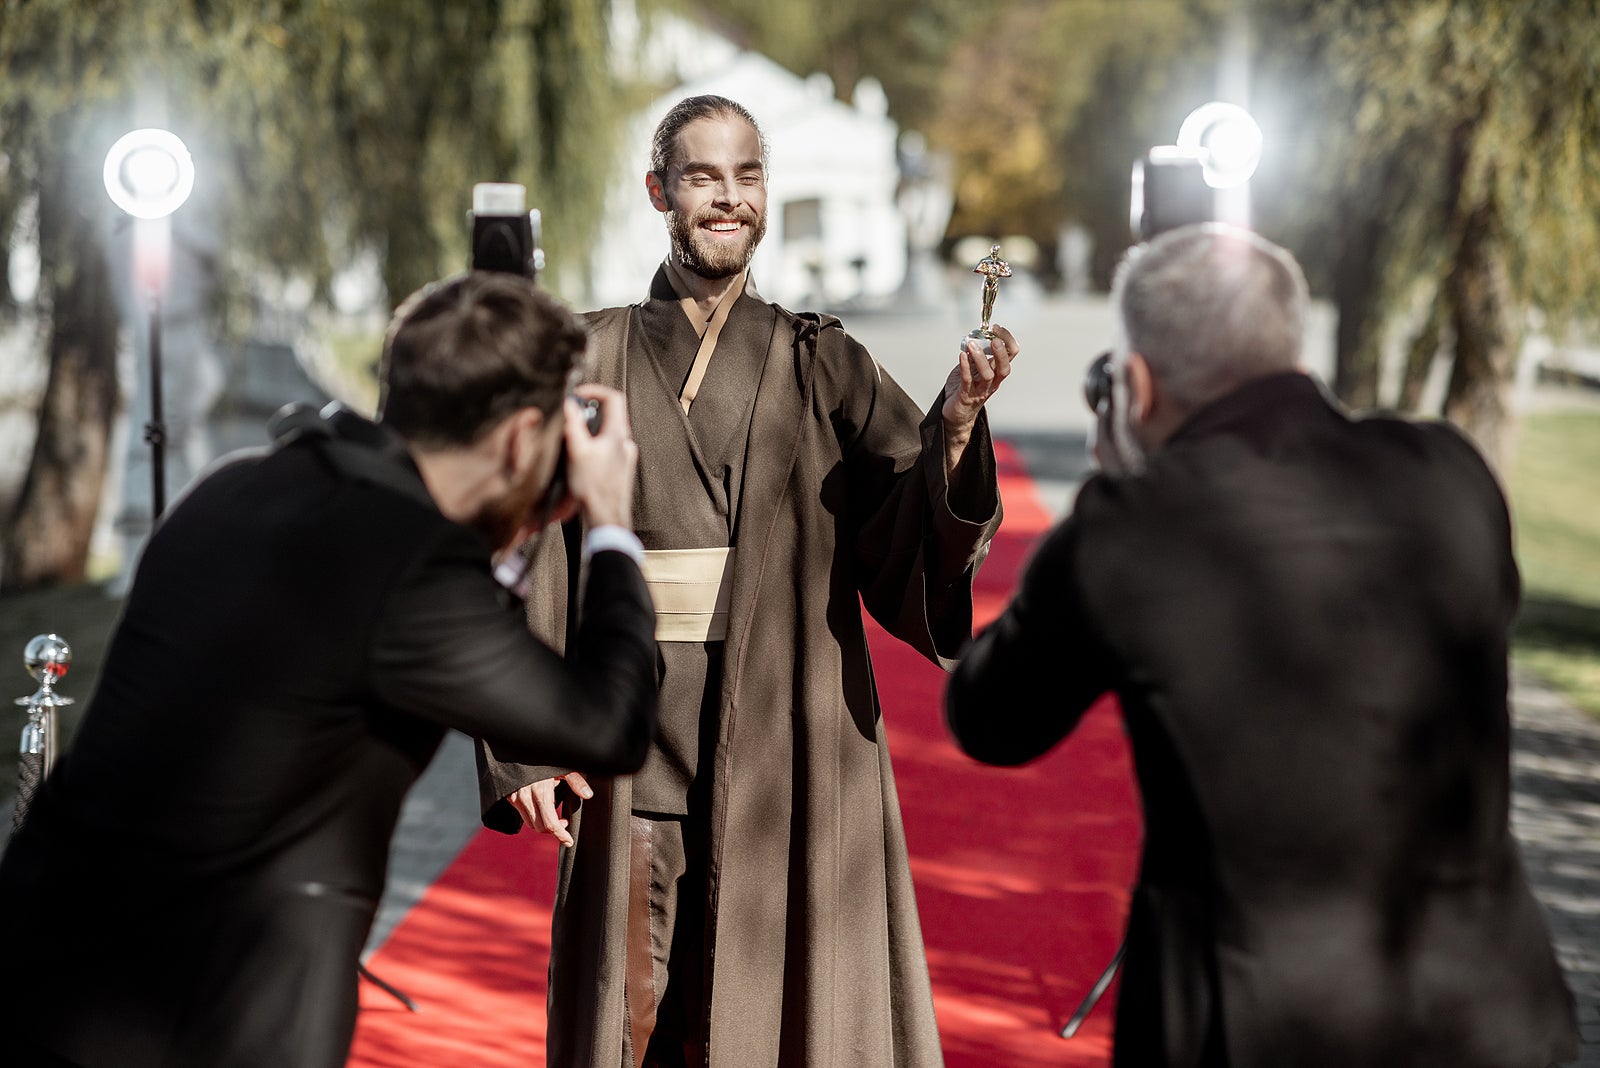 Man in costume as a well-known film character walking with annoying photo reporters on the red carpet during awards ceremony